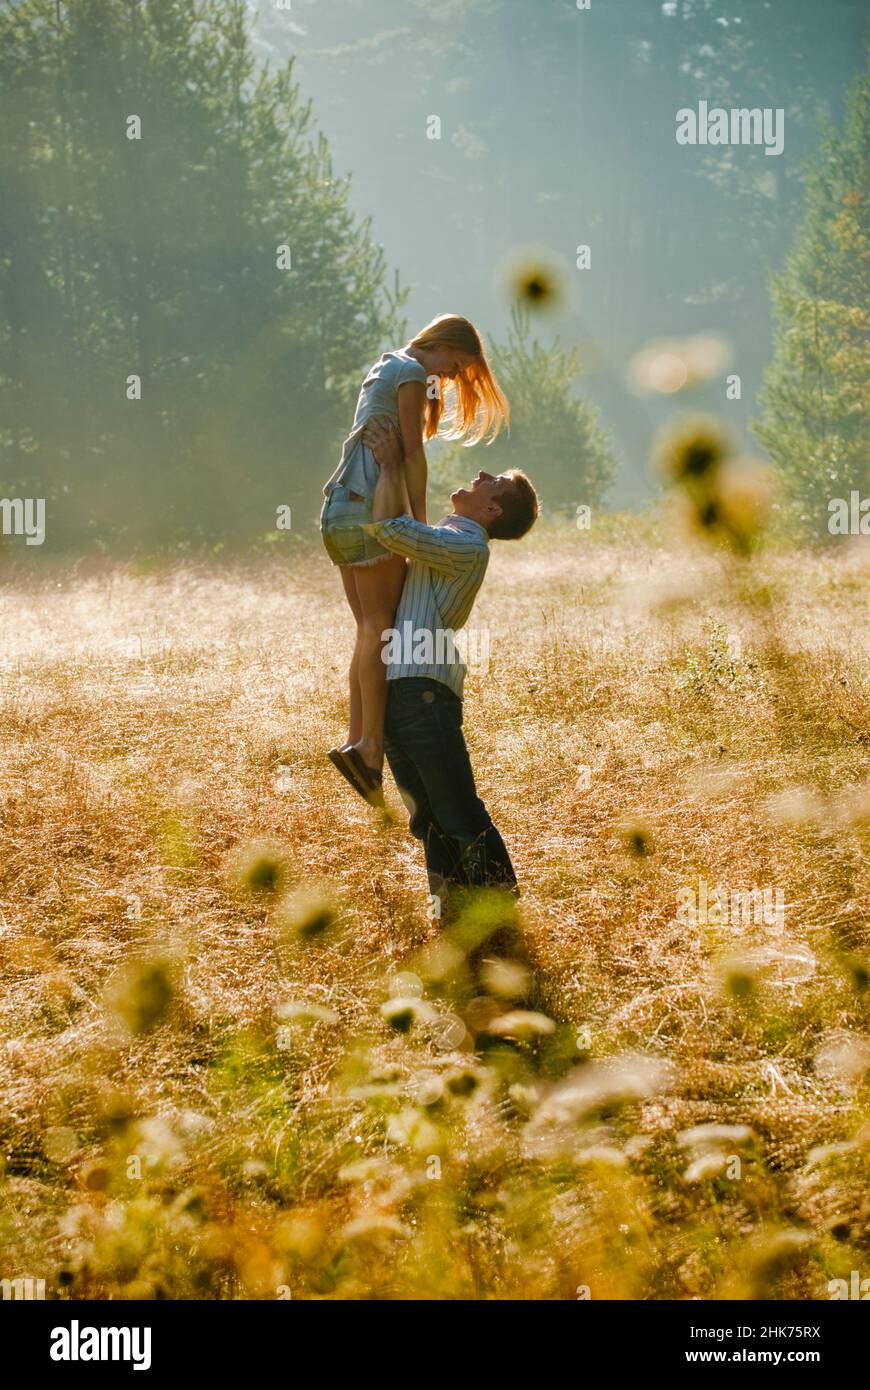 Young couple in a bright field, the man holding the woman aloft Stock Photo